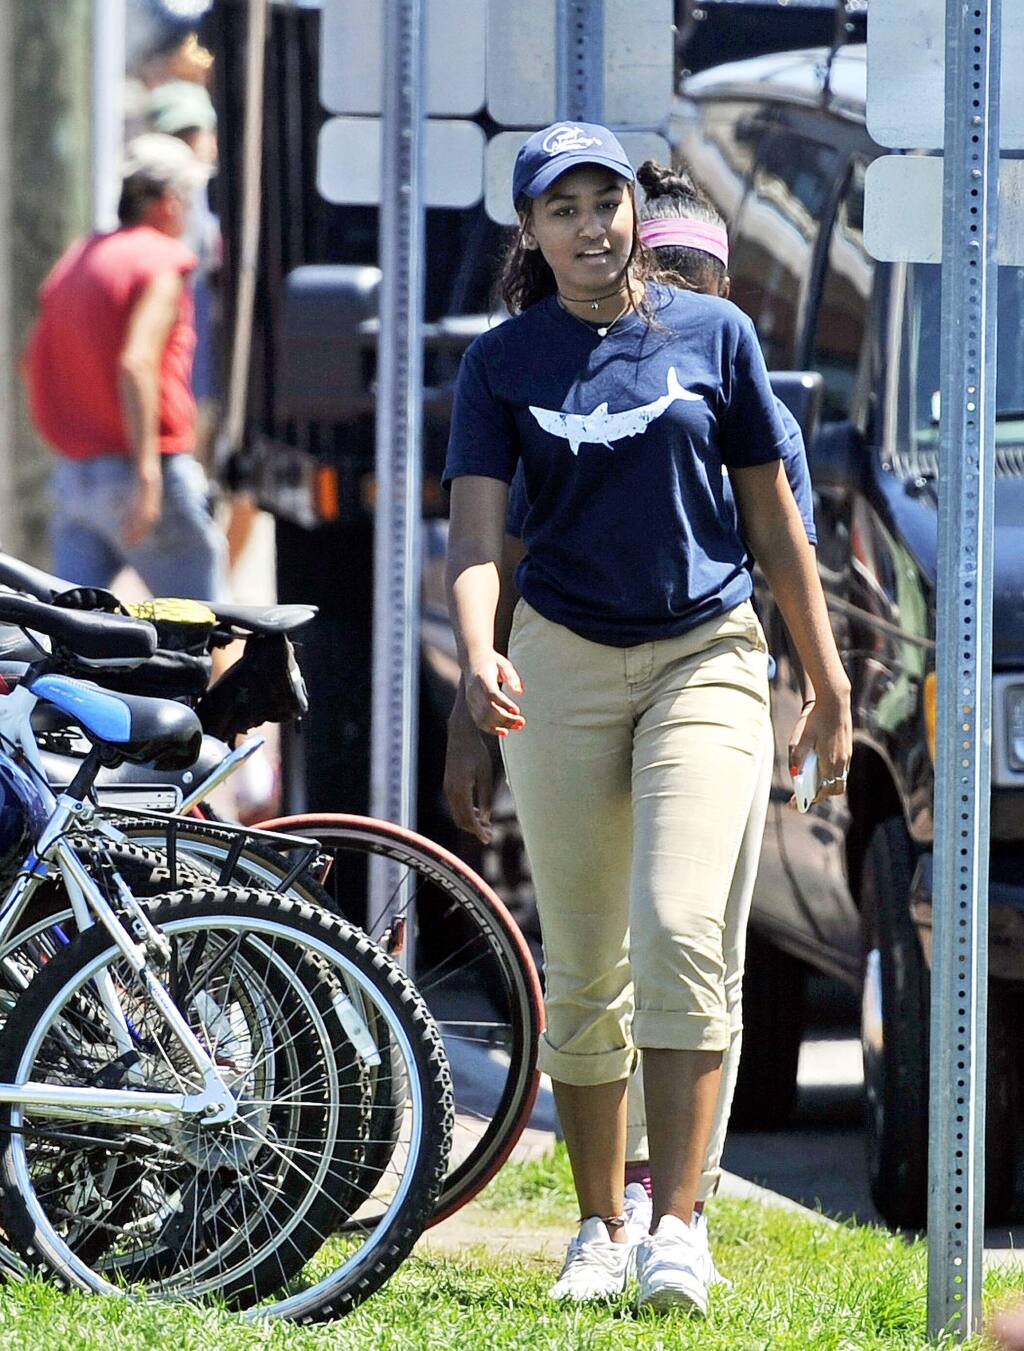 In this Wednesday, Aug. 3, 2016 photo Sasha Obama, daughter of President Barack Obama, departs Nancy's Restaurant after working her shift there, in Oak Bluffs, Mass., on the island of Martha's Vineyard. (Boston Herald, Christopher Evans via AP)